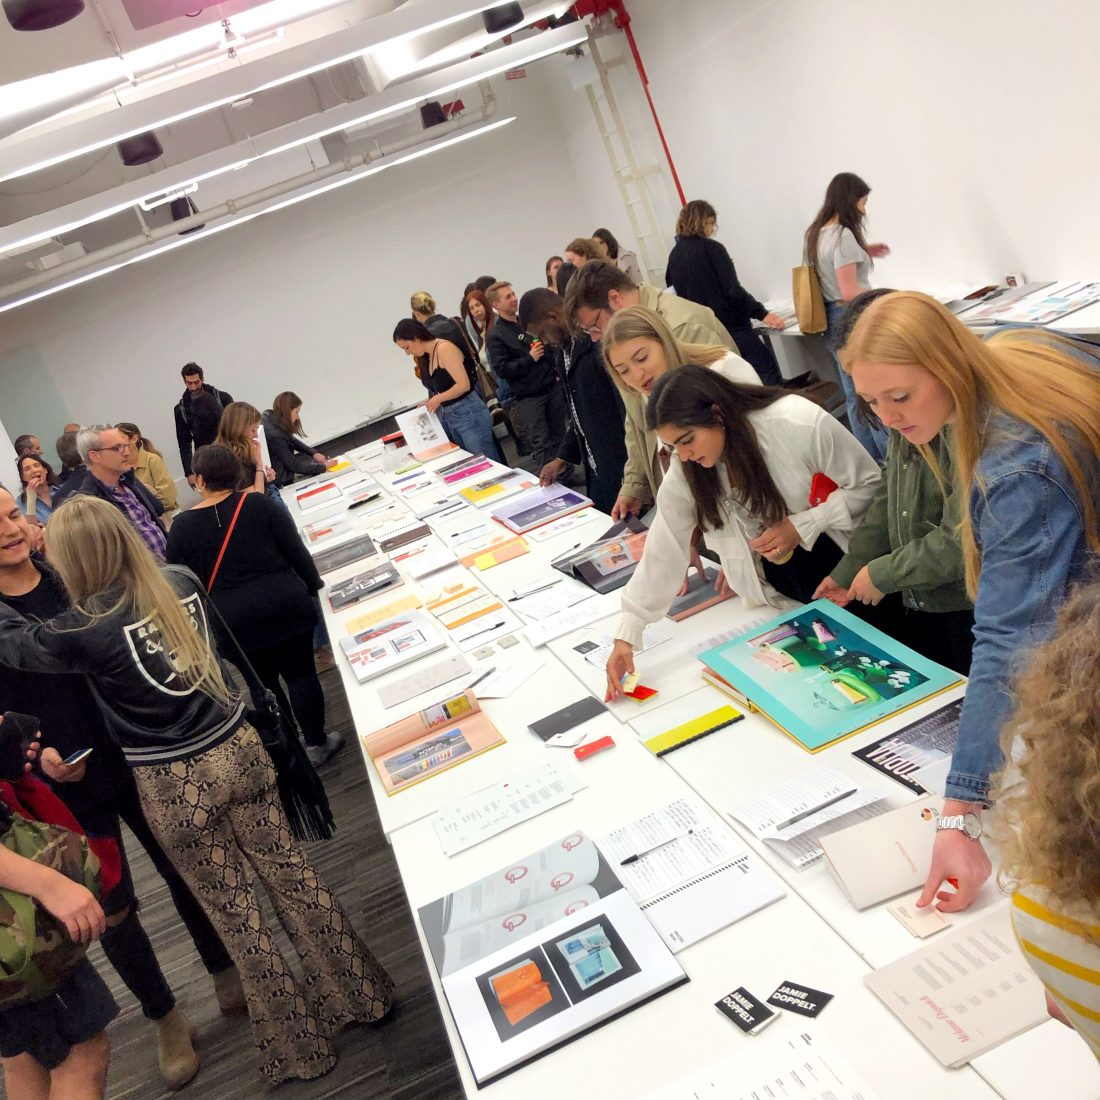 A group of people look at portfolios of design work on a table